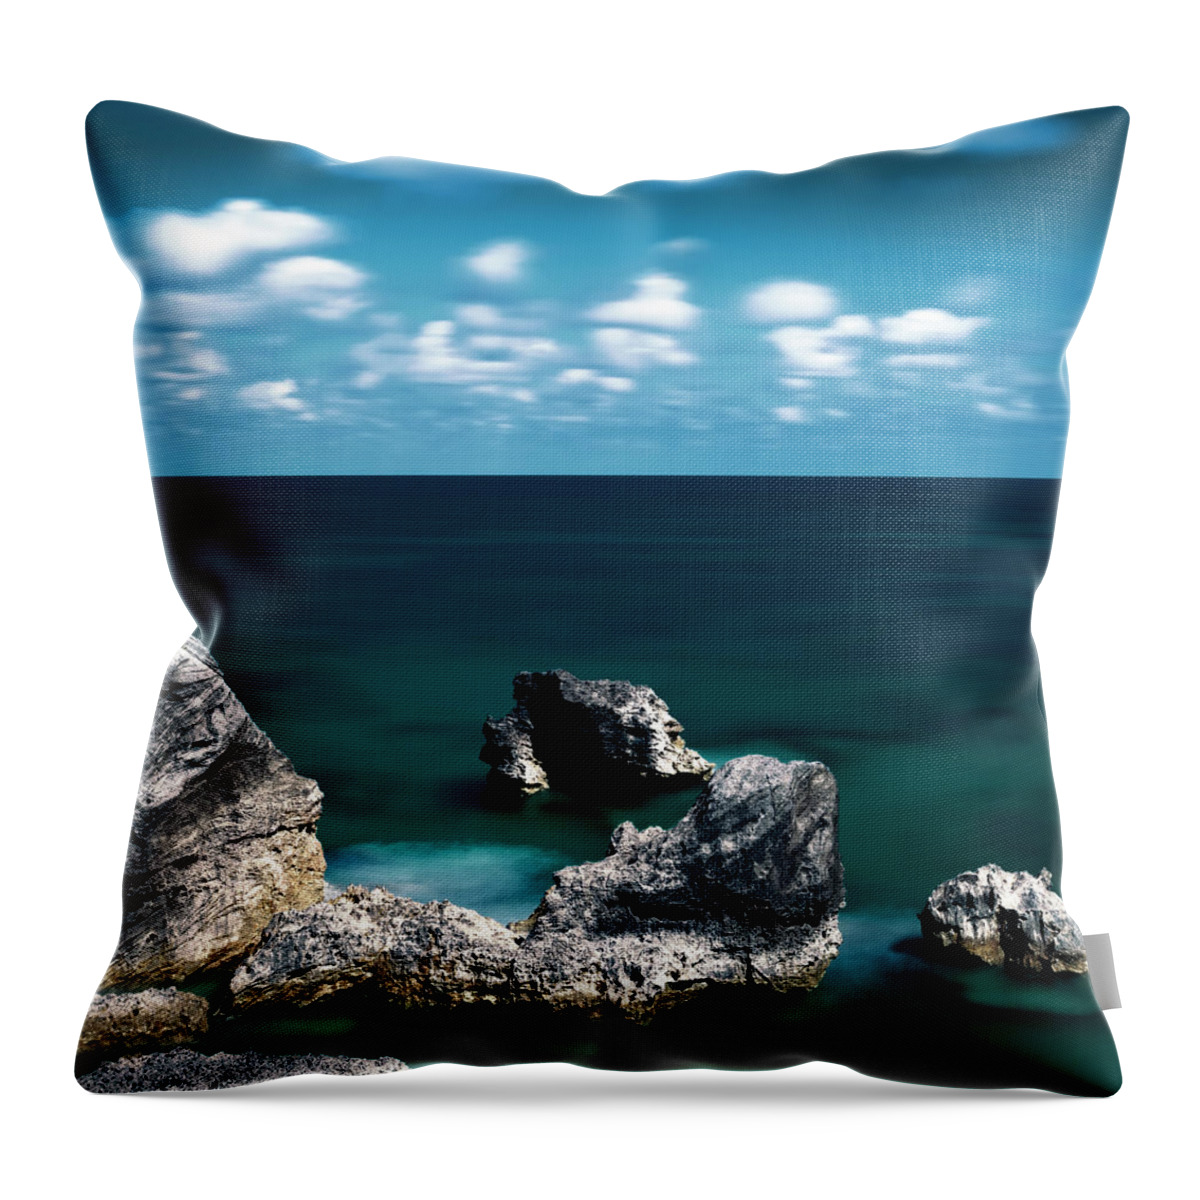 Tranquility Throw Pillow featuring the photograph Horseshoe Bay by Photo By Edward Kreis, Dk.i Imaging